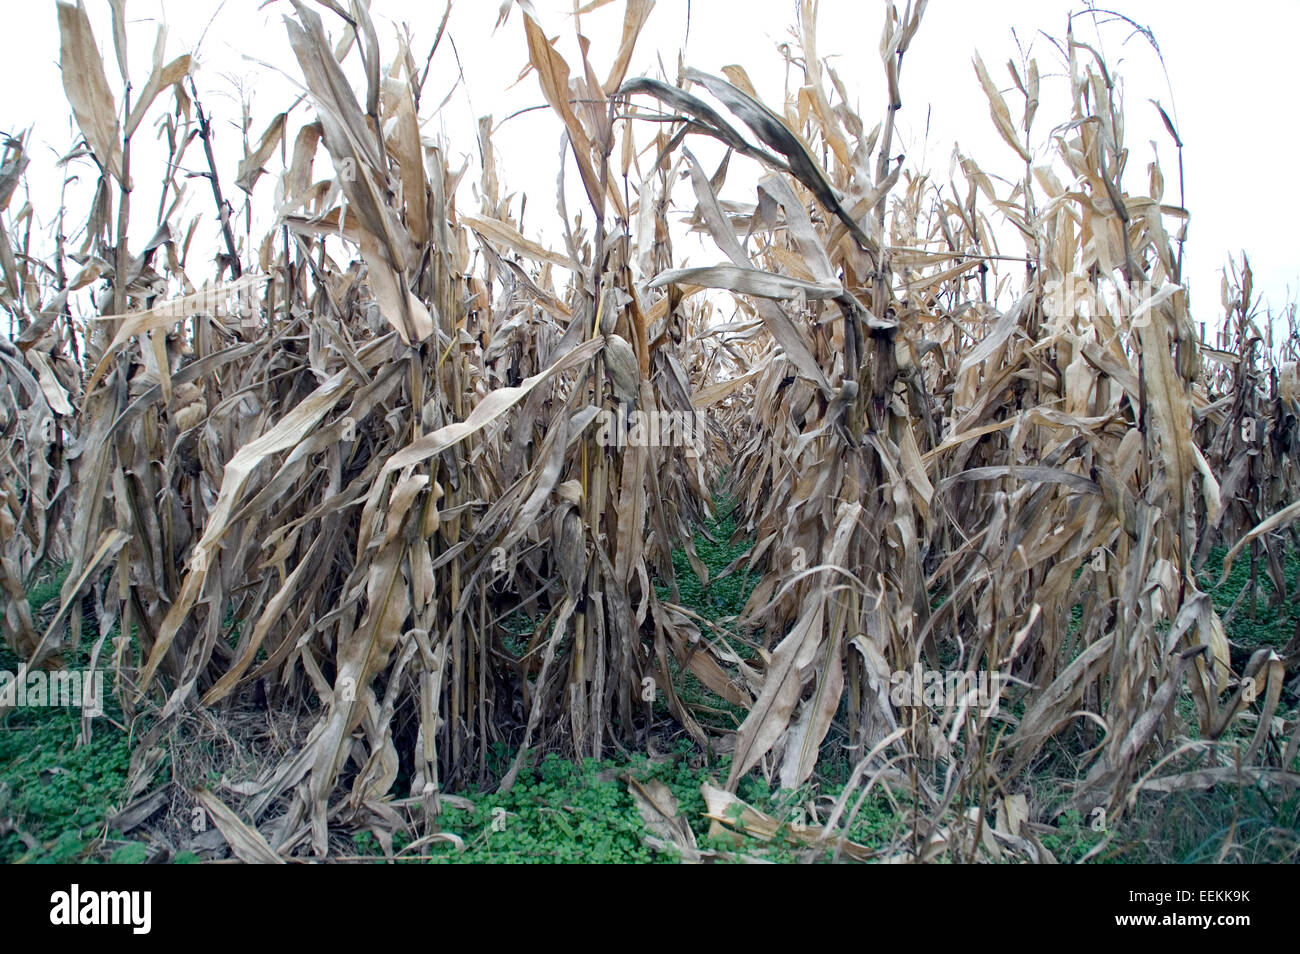 Corn that had dried in the field and awaits reading. Stock Photo